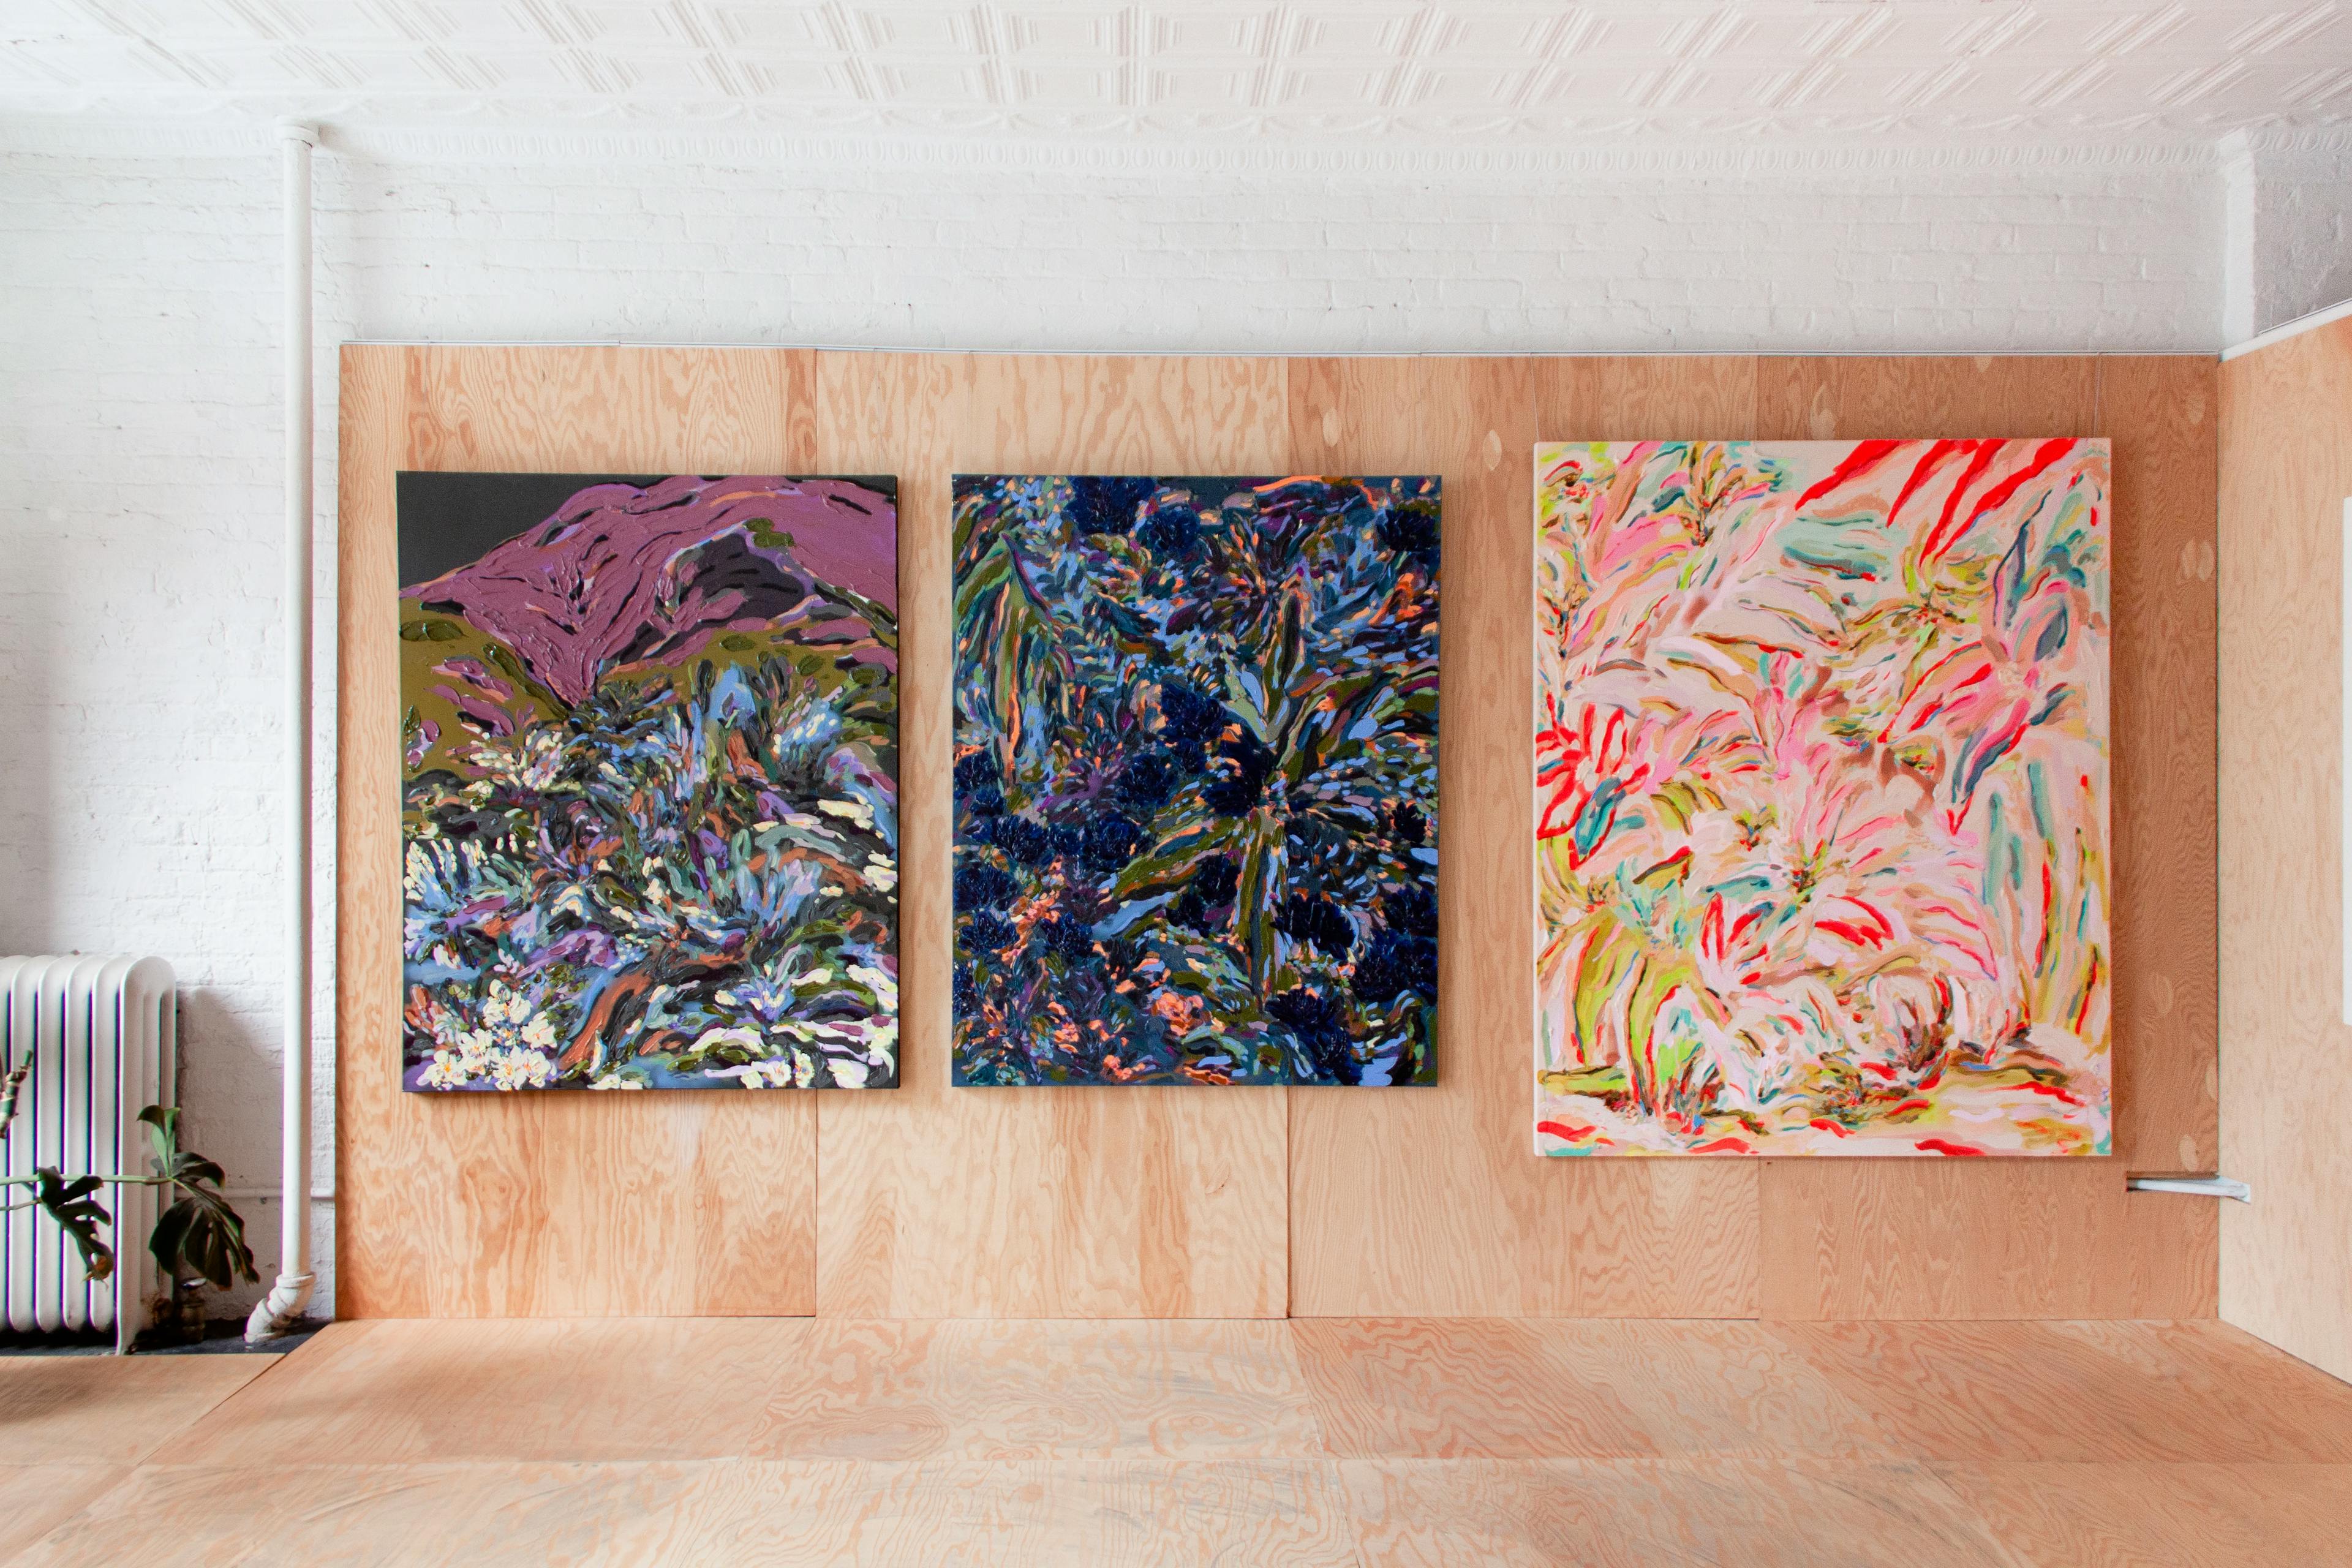 Three large floral paintings by Erin Lynn Welsh in the exhibition Give and Take.